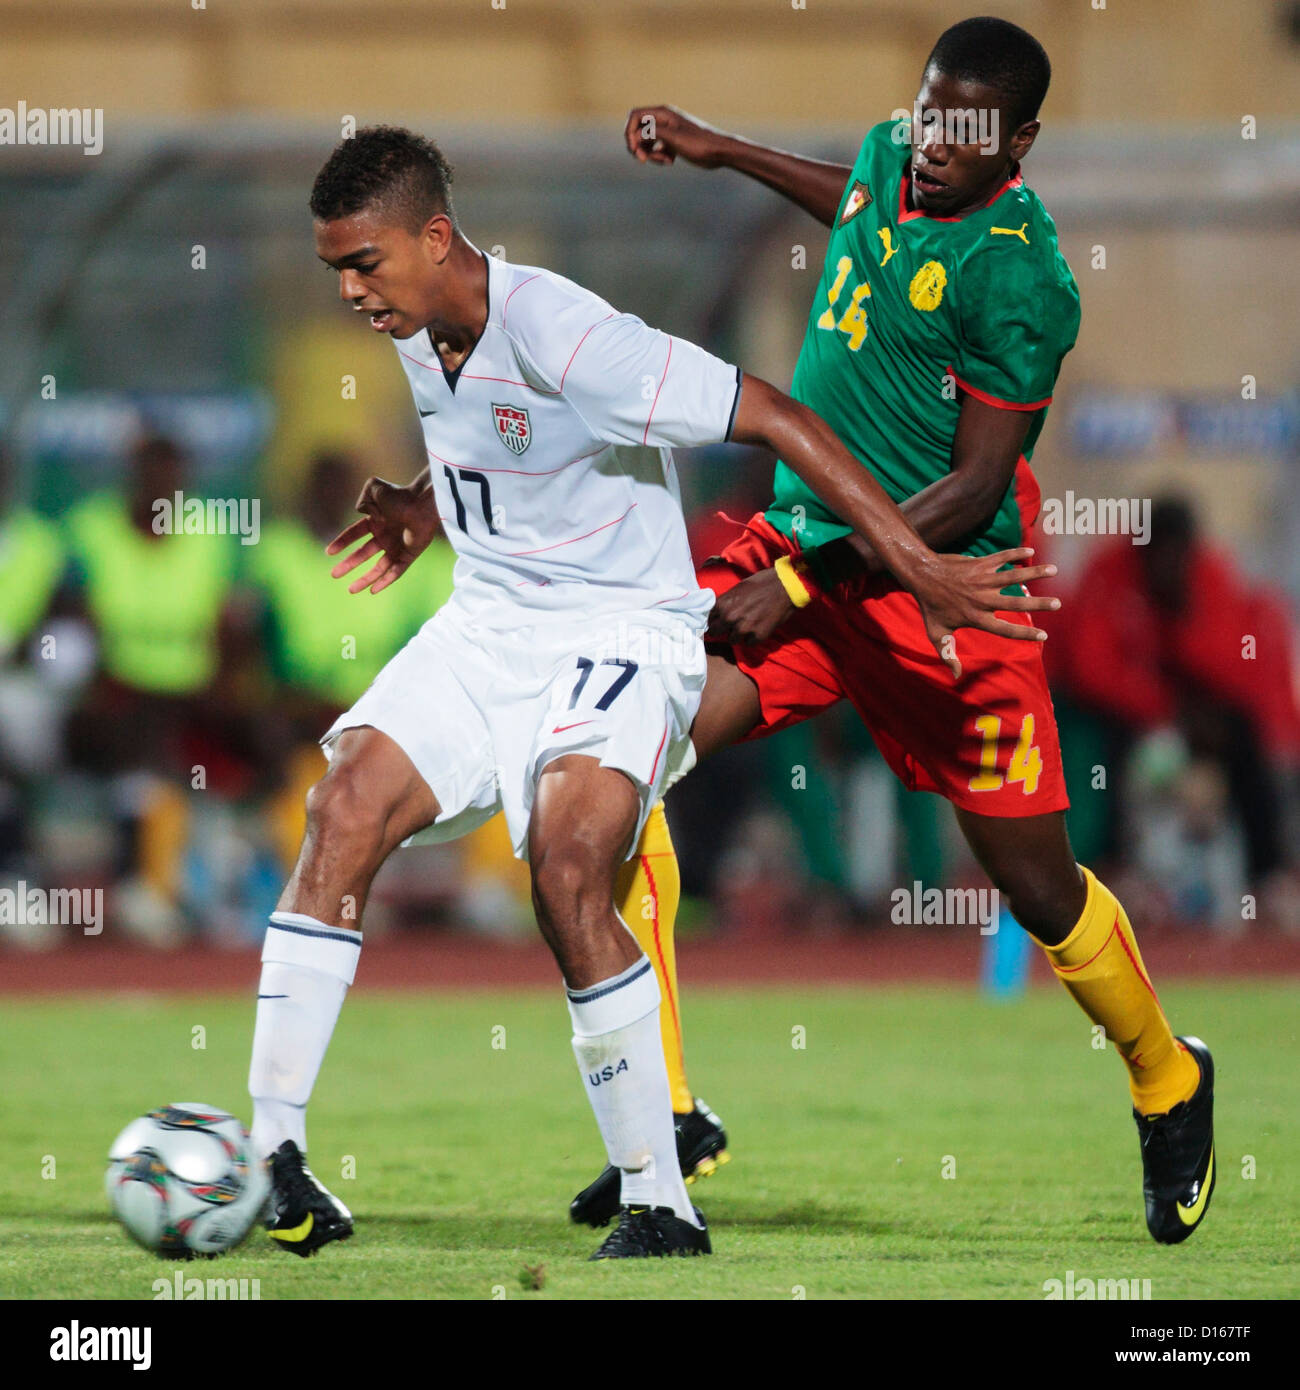 Patrick Ekeng of Cameroon (R) pressures Bryan Arguez of the United States (L) during the 2009 FIFA U-20 World Cup Group C match. Stock Photo